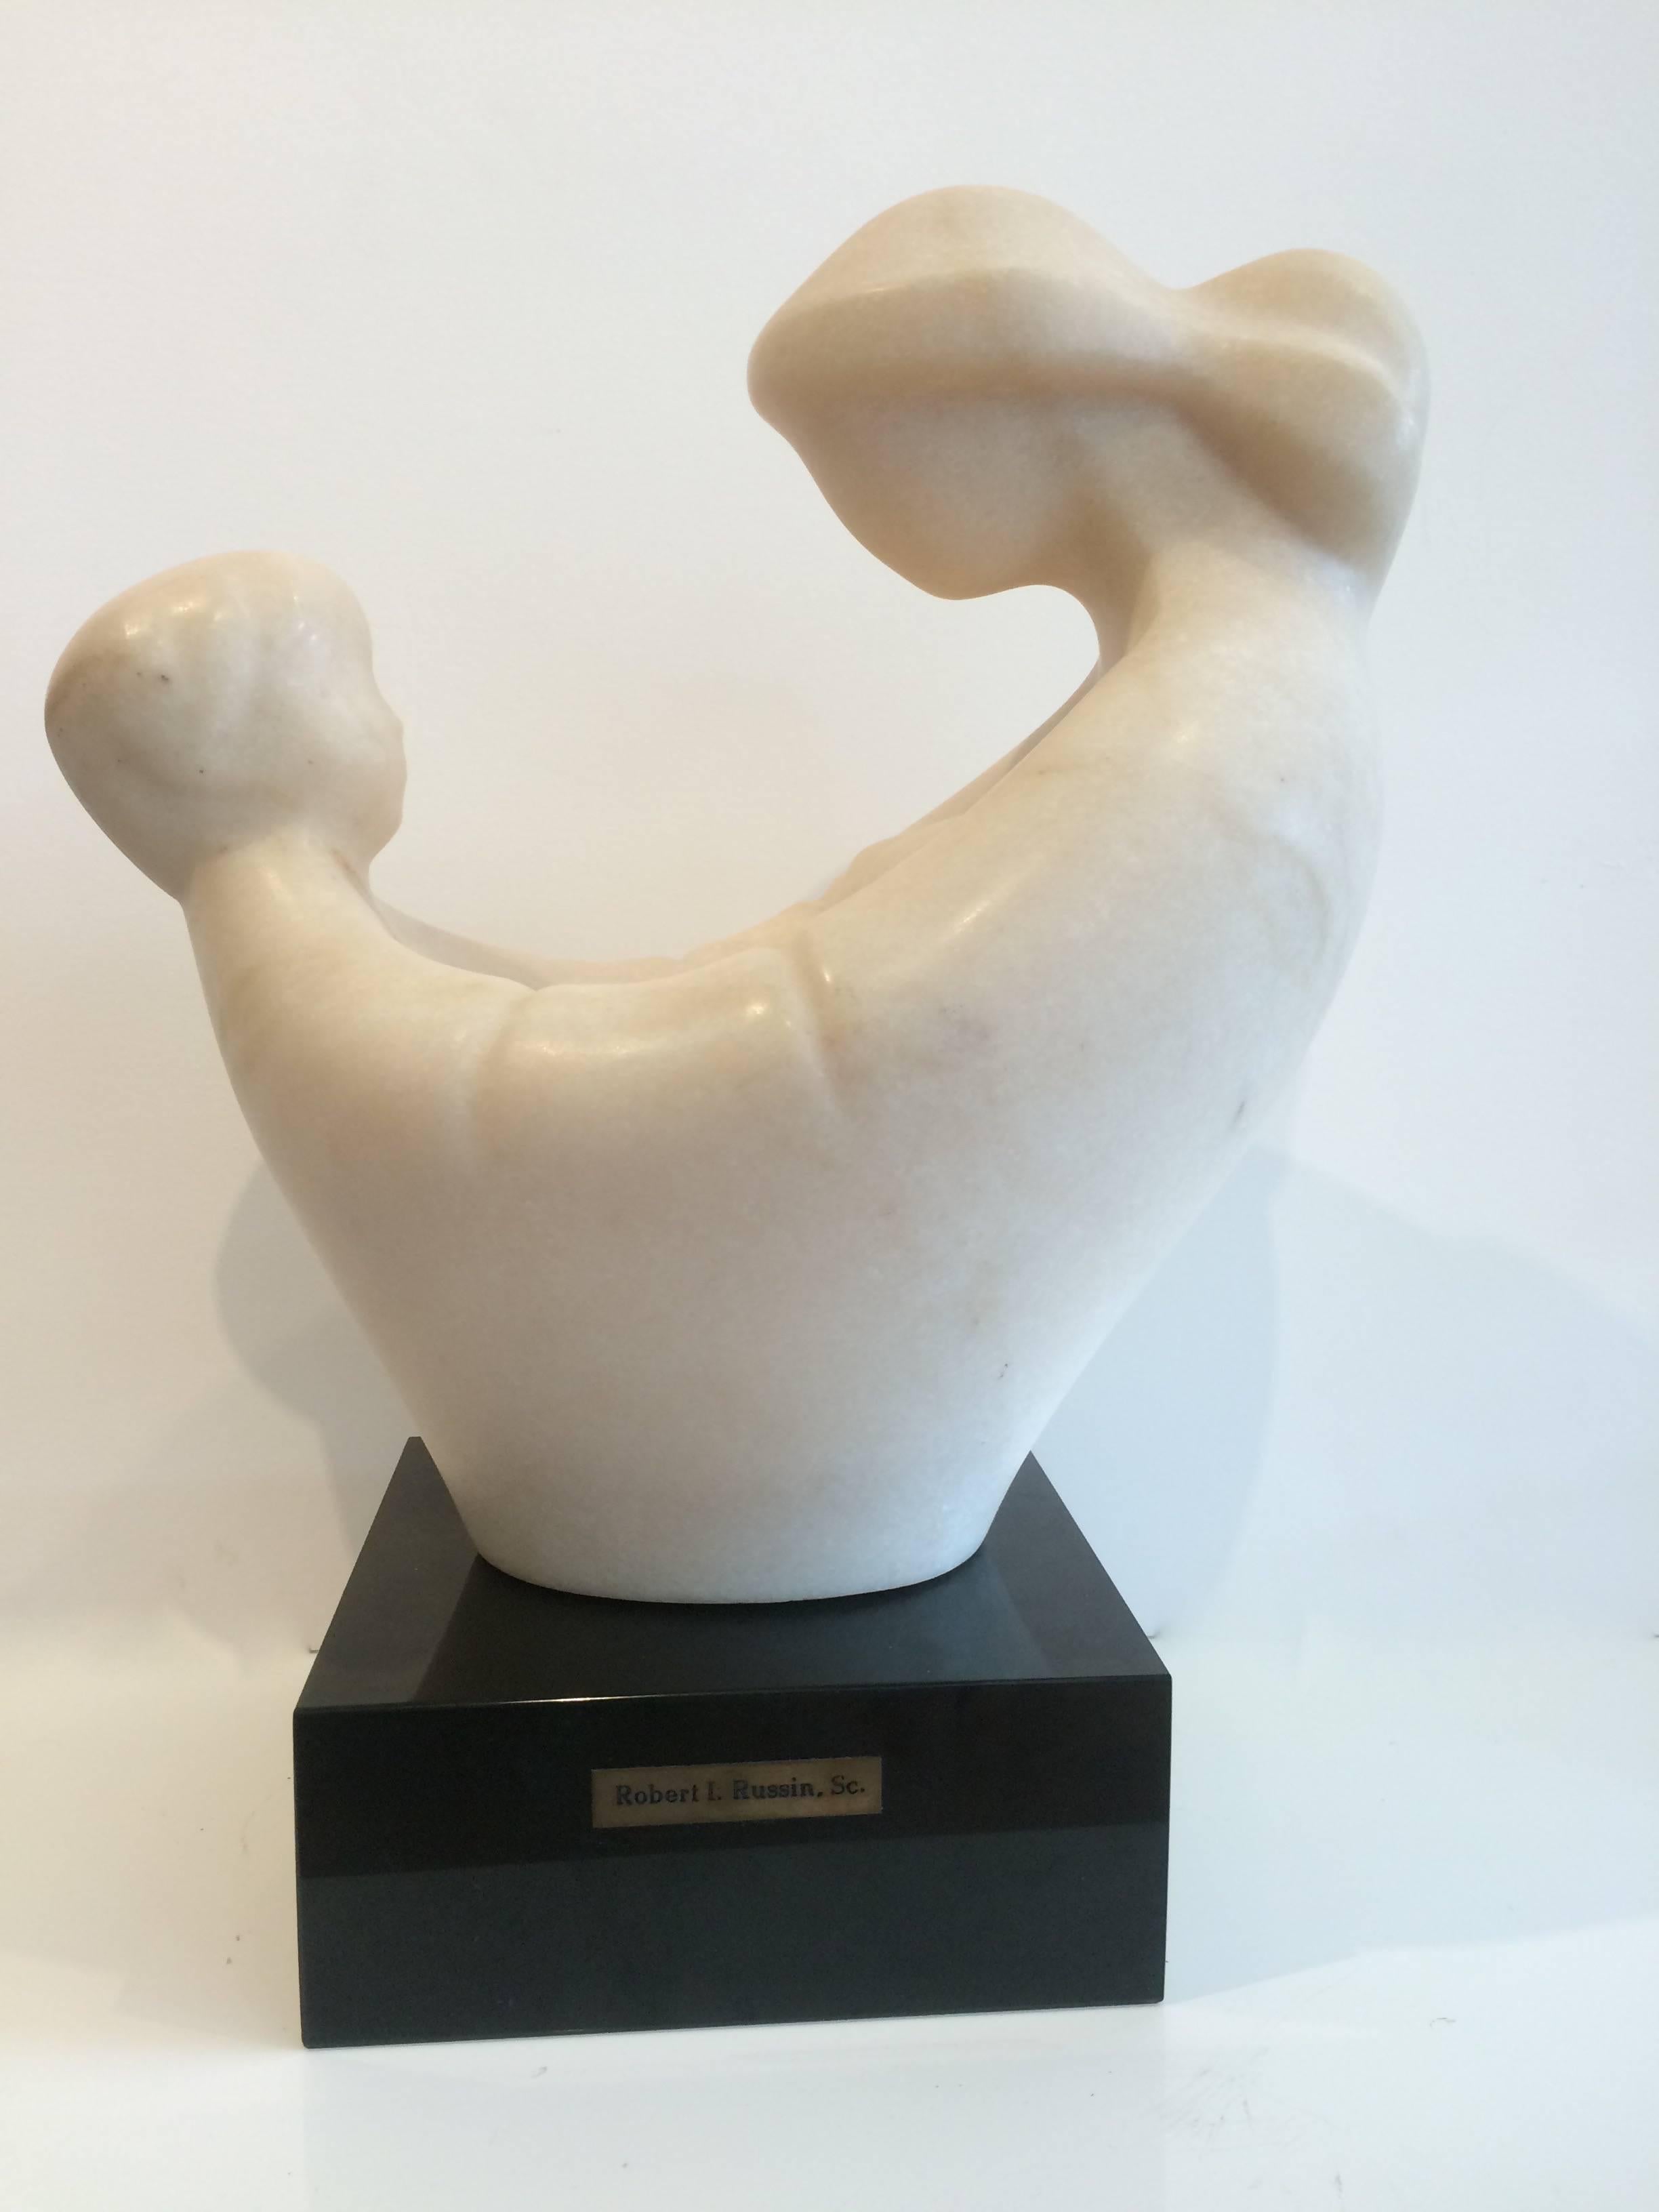 Mother with child.
Soft pink-white marble, black onyx pedestal, artist signed.
It will be shipped in two separate boxes.
Robert Russin, born in 1914, in New York City died in 2007, well recognized American Artist.
Russin was educated at the City